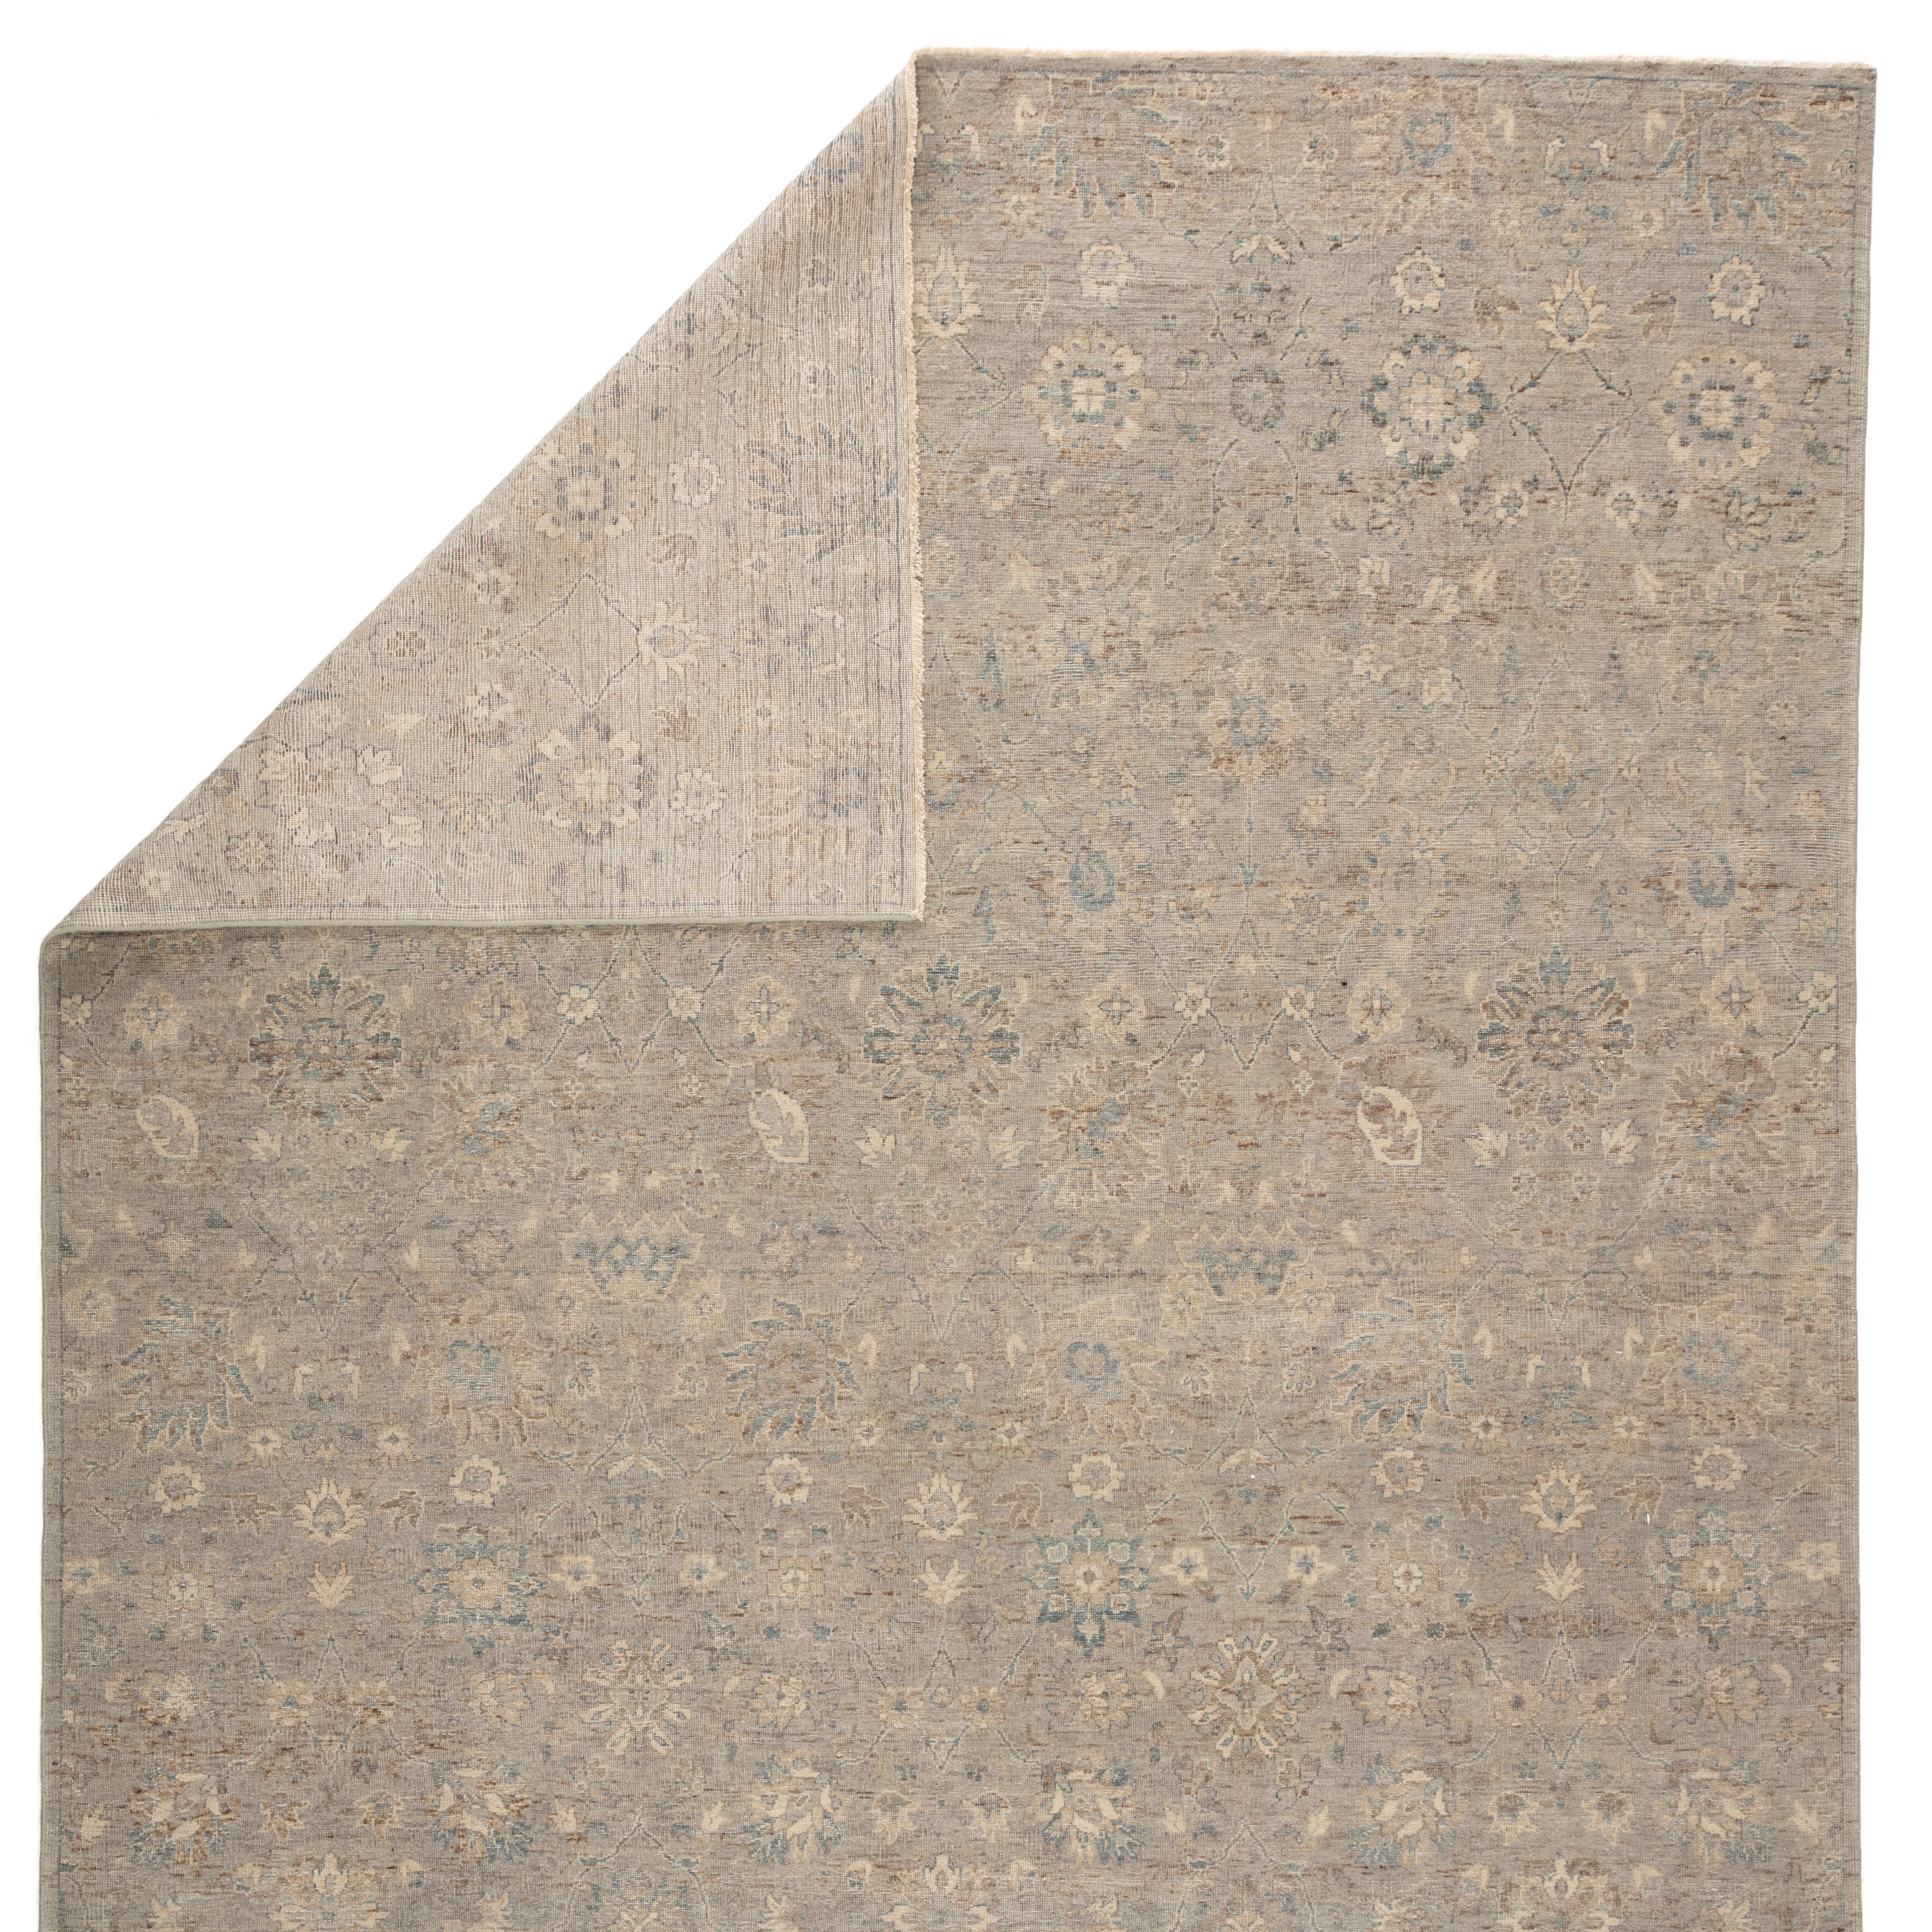 Pembe Hand-Knotted Oriental Gray/ Blue Area Rug (10'X14') - Image 2